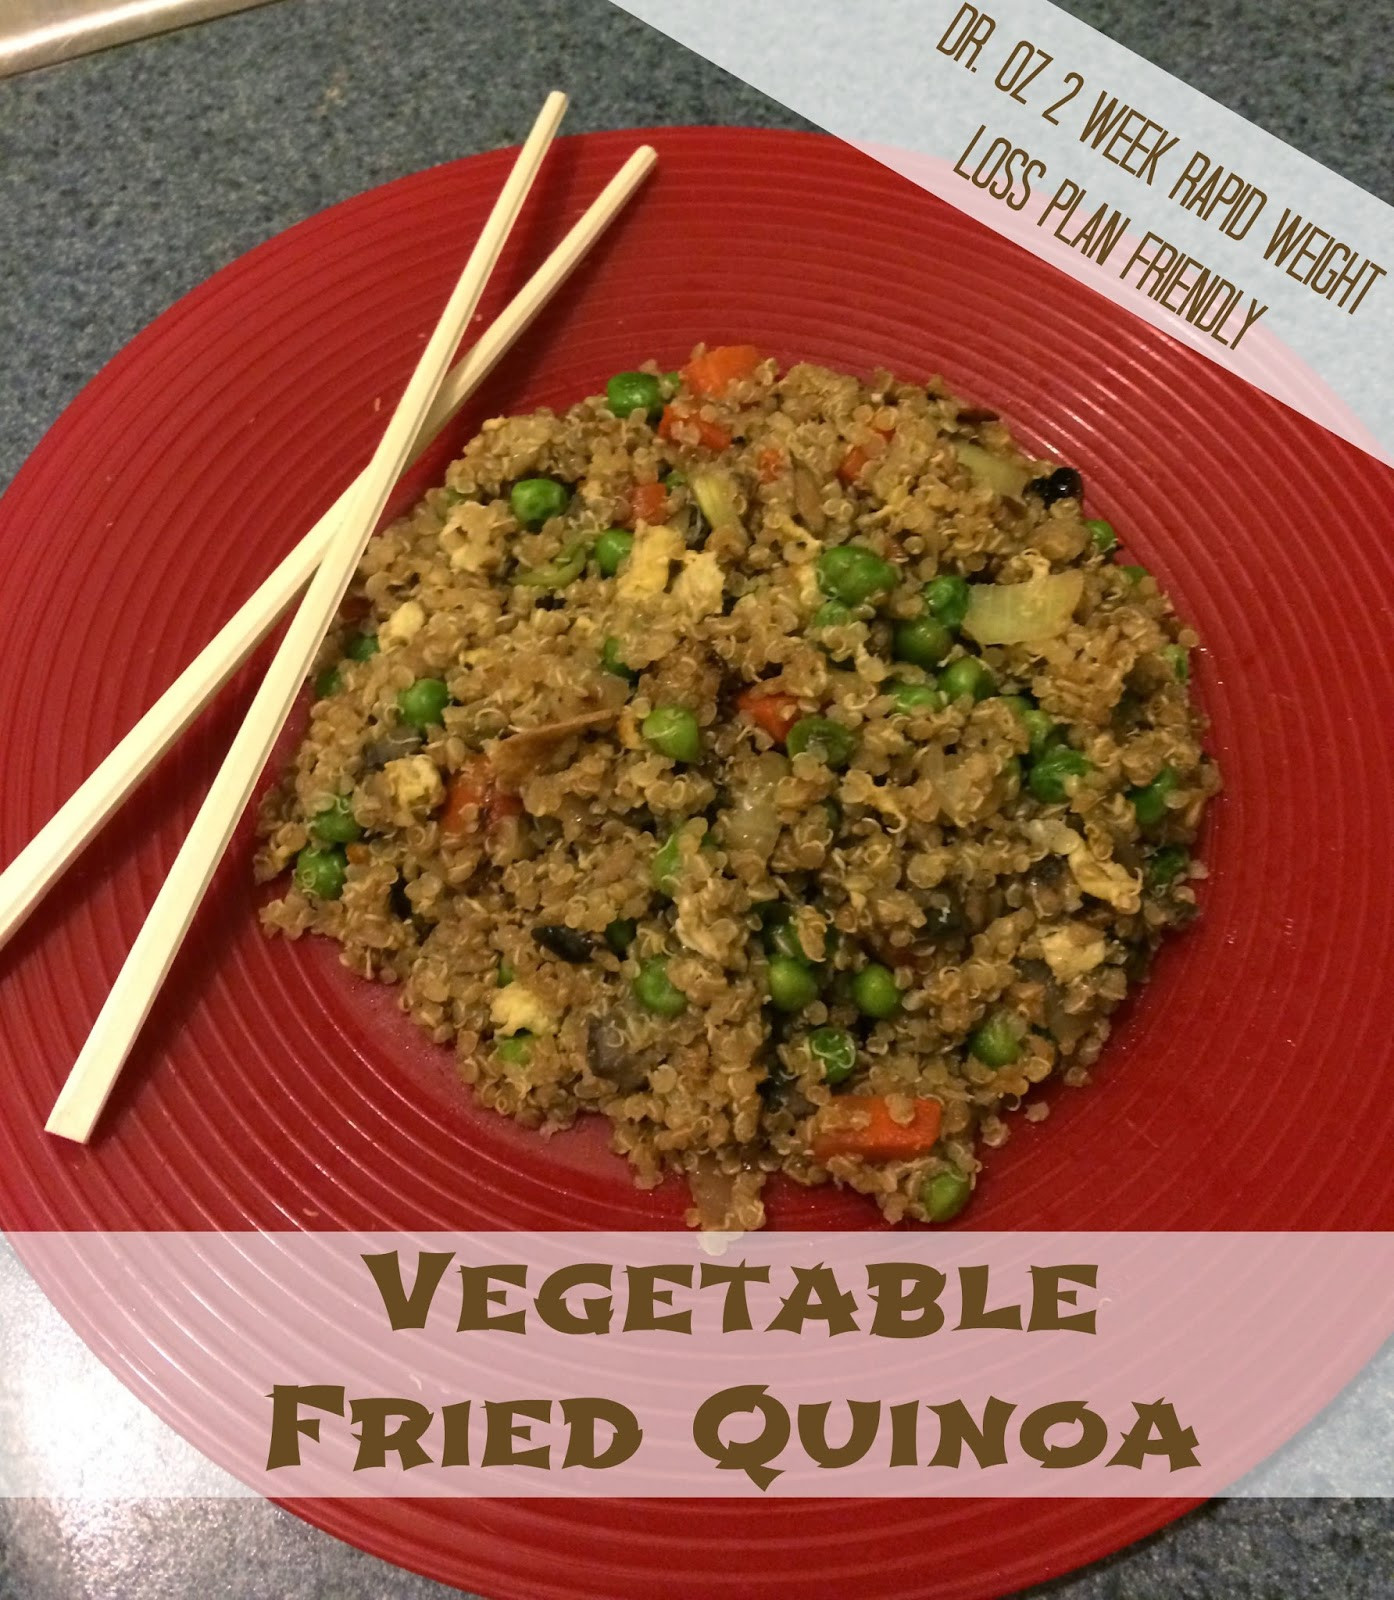 Dr Oz 2 Week Rapid Weight Loss Plan Recipes
 Ve able Fried Quinoa Dr Oz 2 Week Rapid Weight Loss